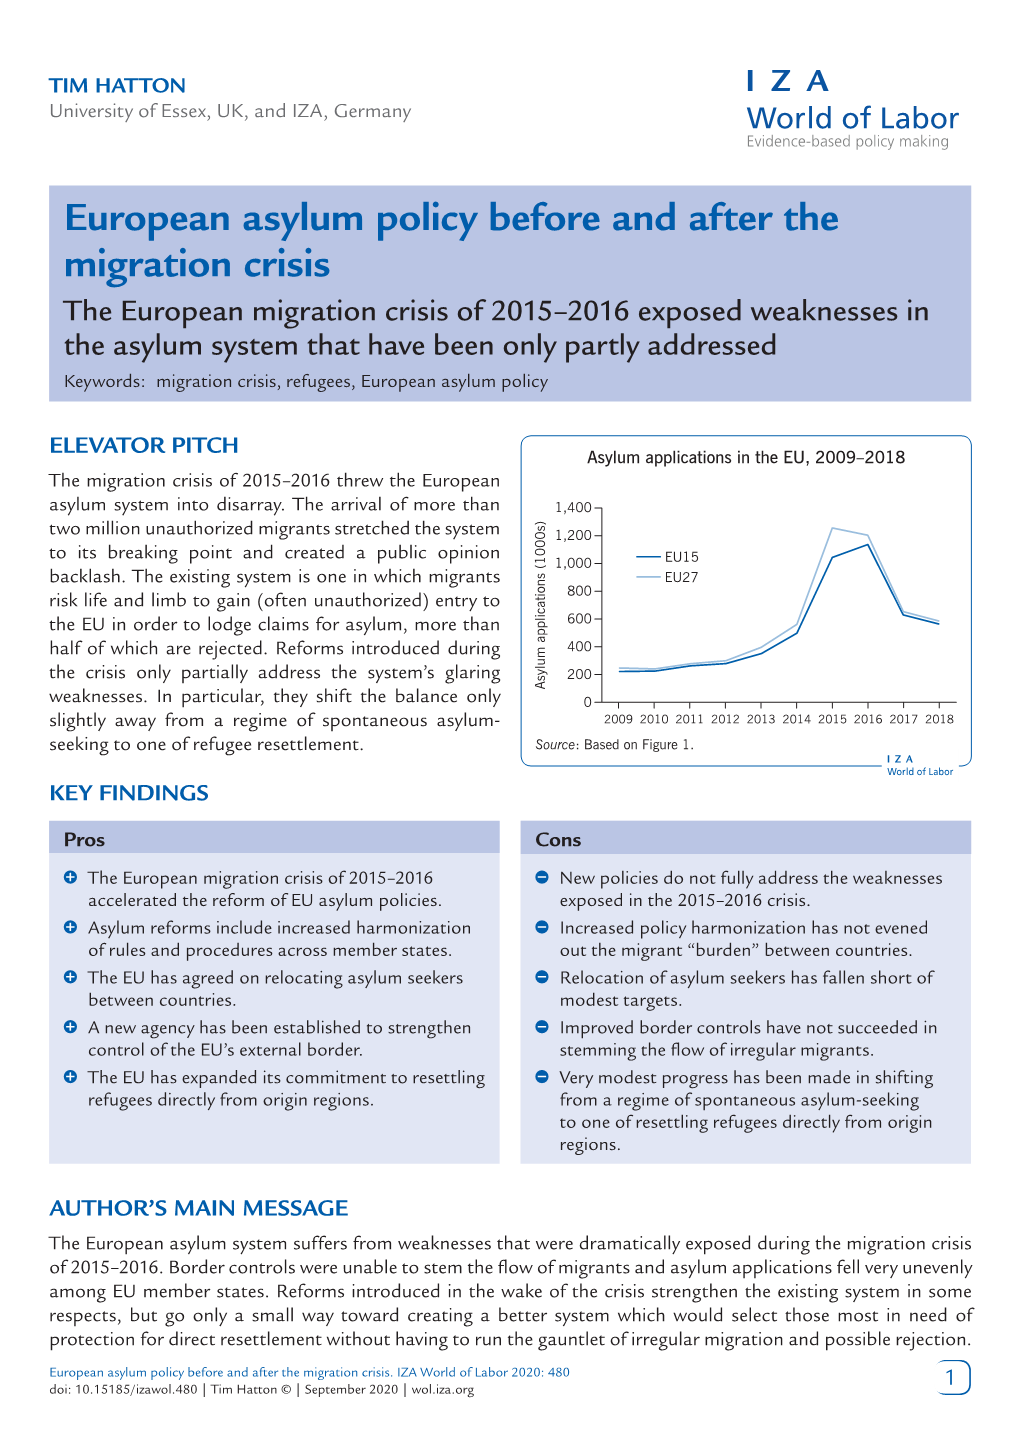 European Asylum Policy Before and After the Migration Crisis